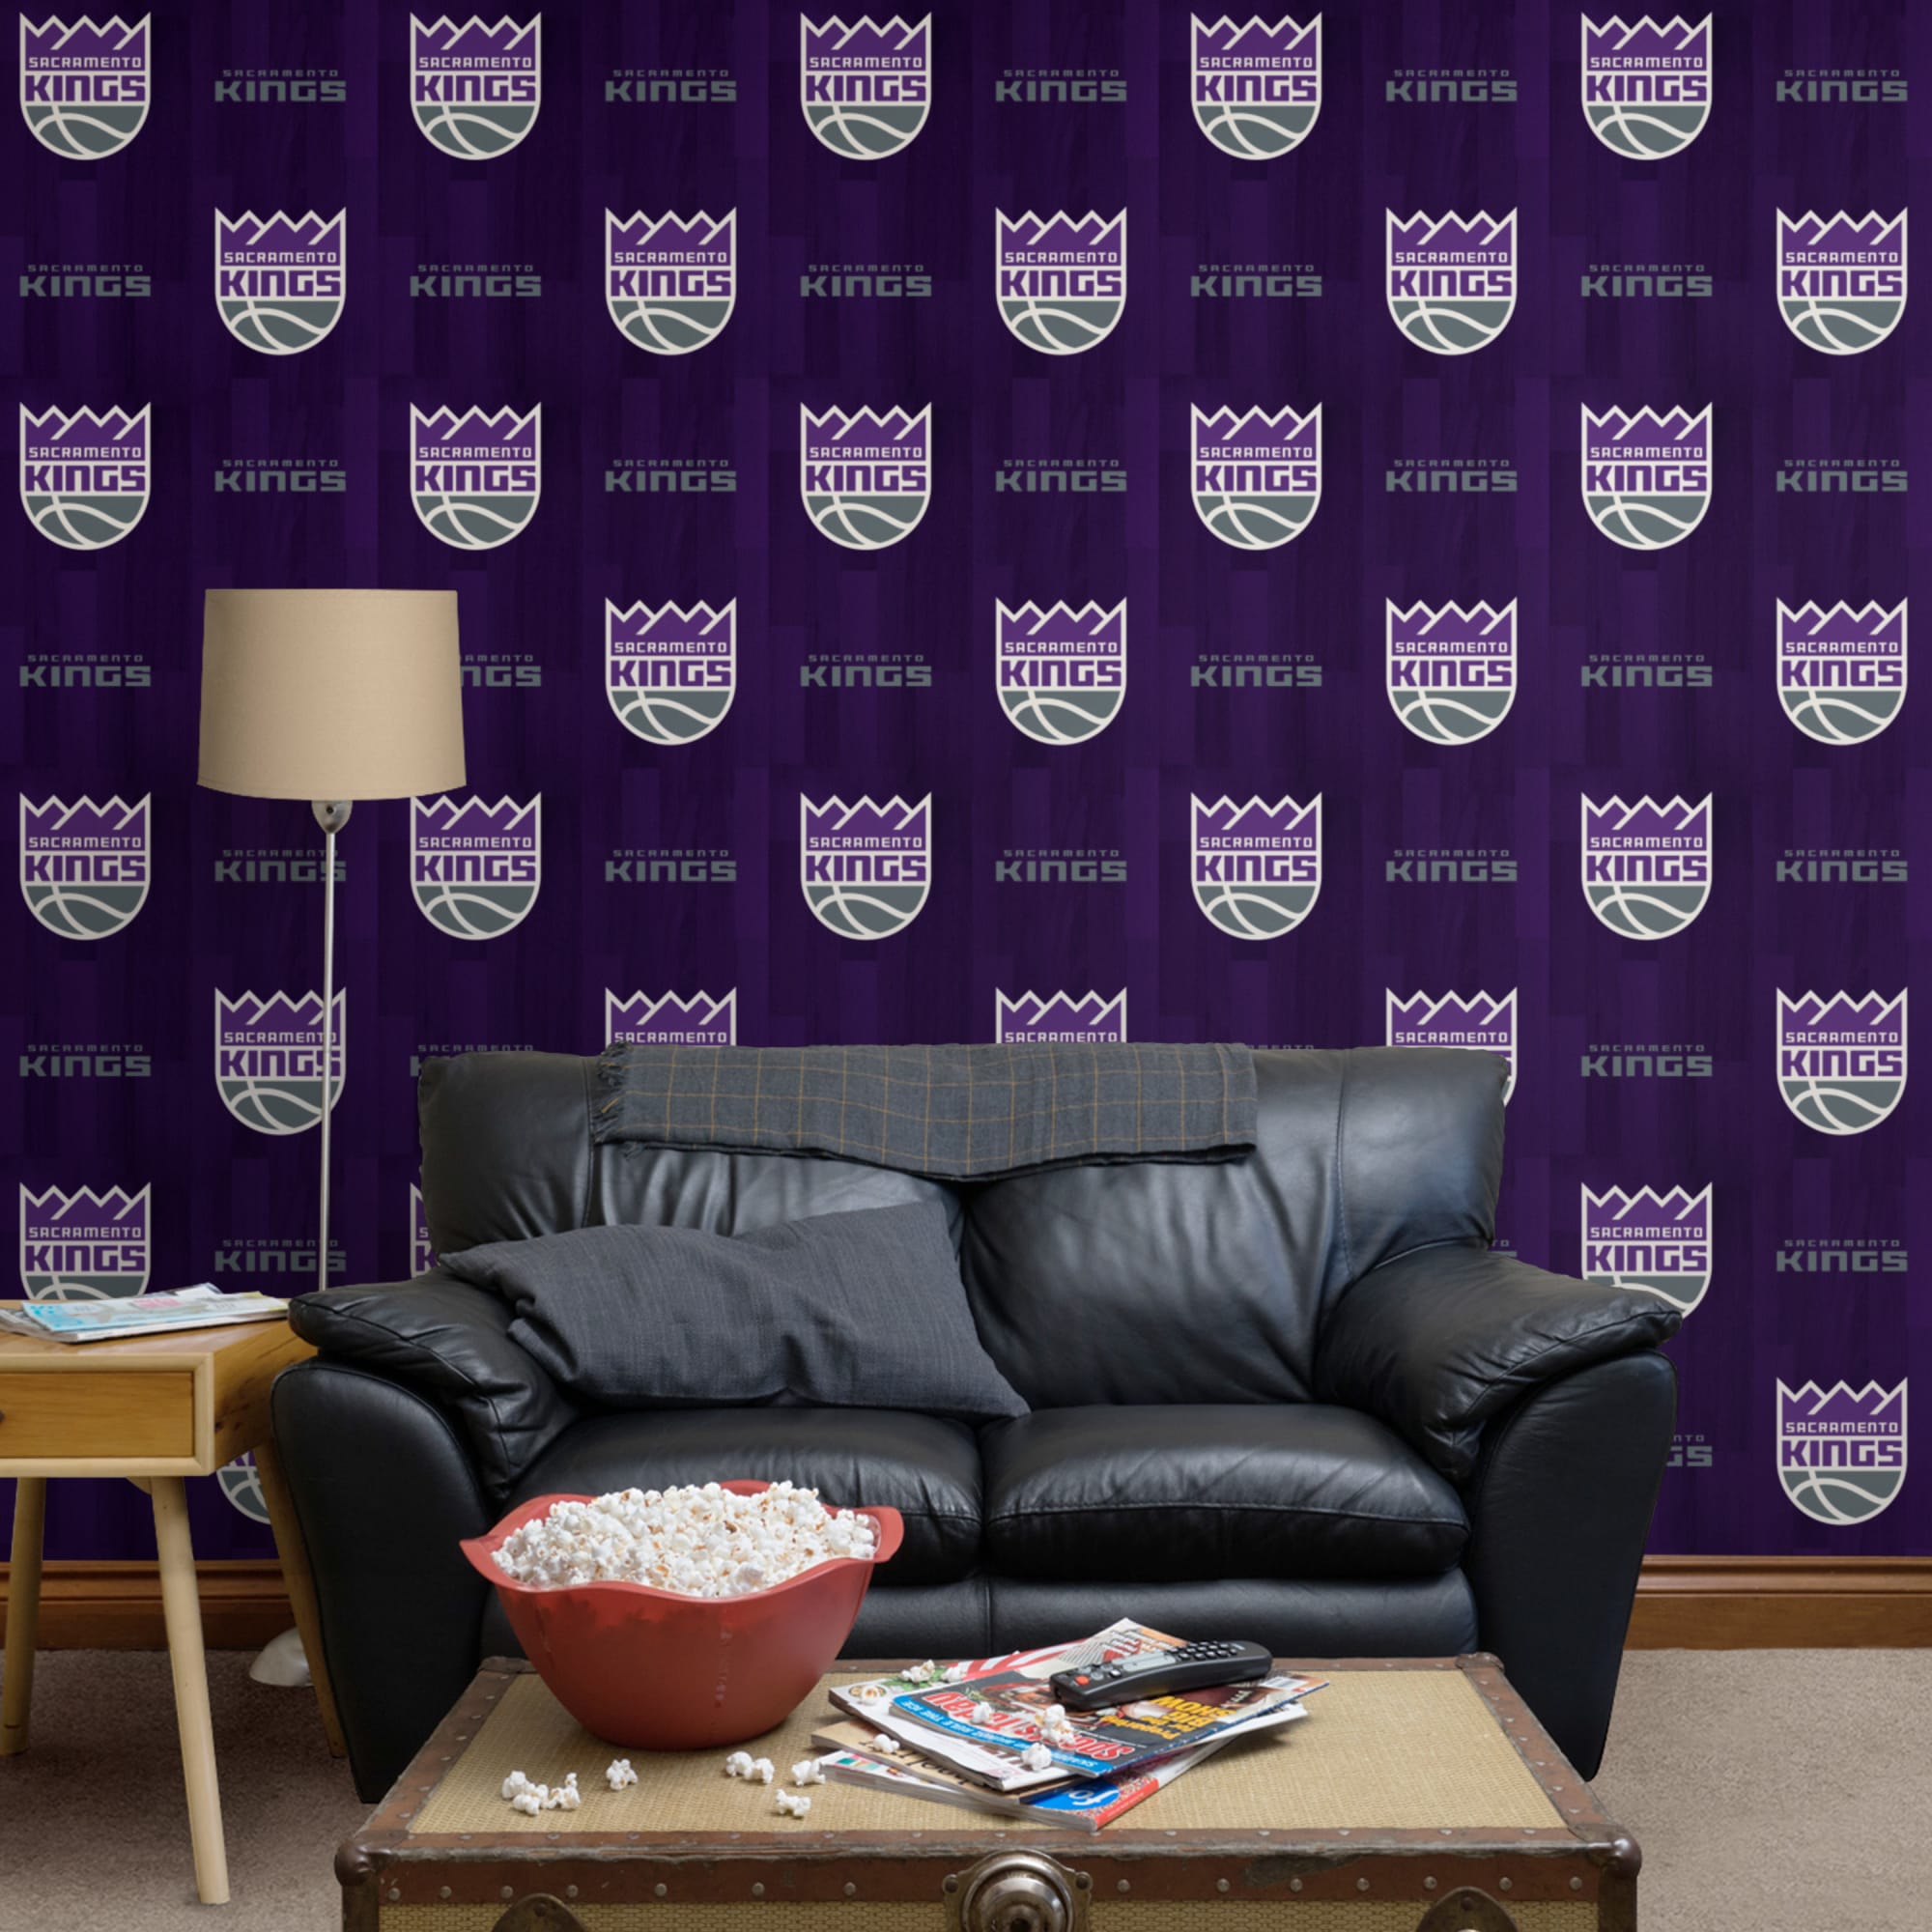 Sacramento Kings: Hardwood Pattern - Officially Licensed Removable Wallpaper 12" x 12" Sample by Fathead